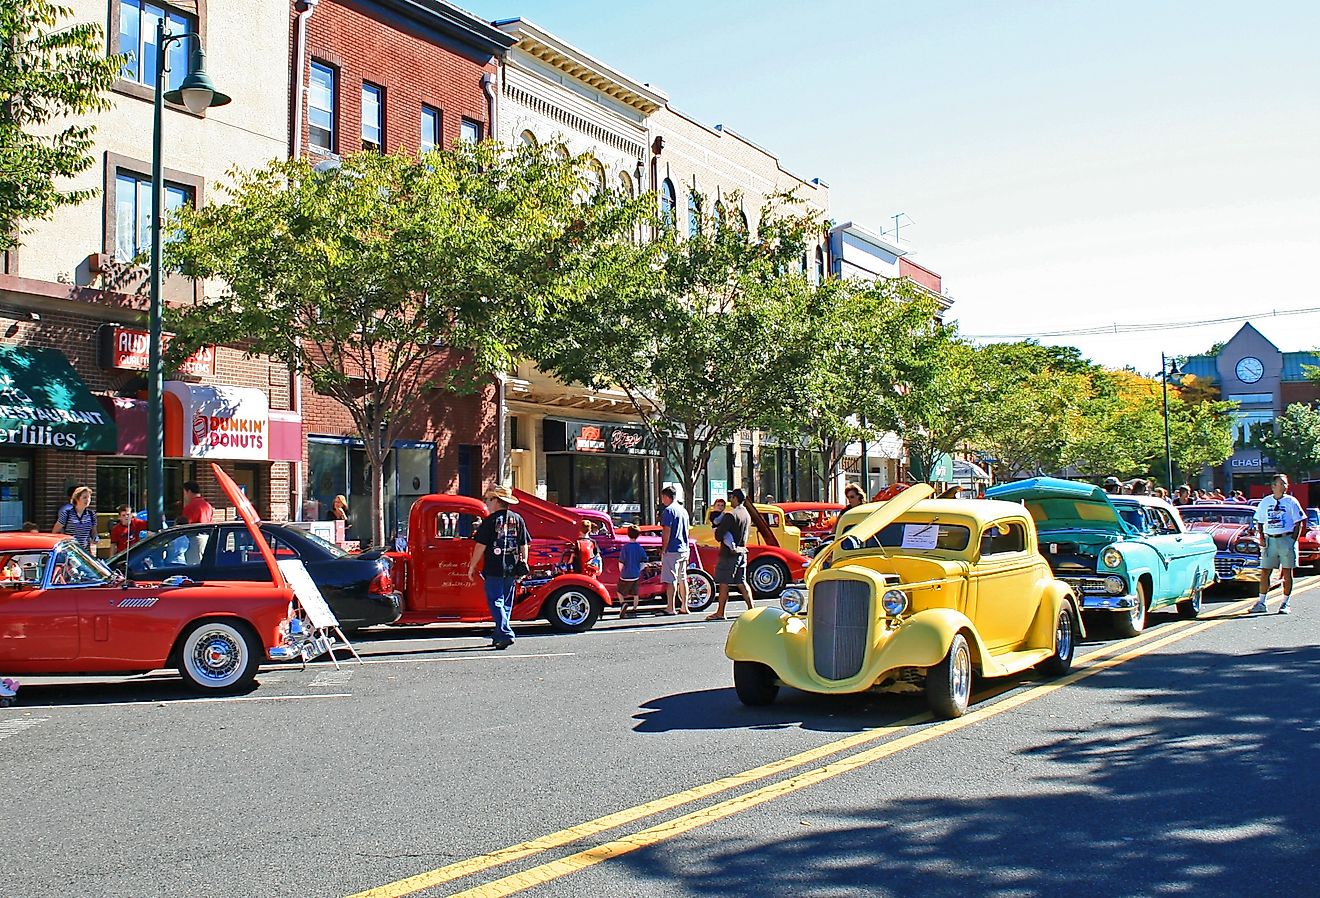 Antique car show in Summit, New Jersey. Image credit gary718 via Shutterstock